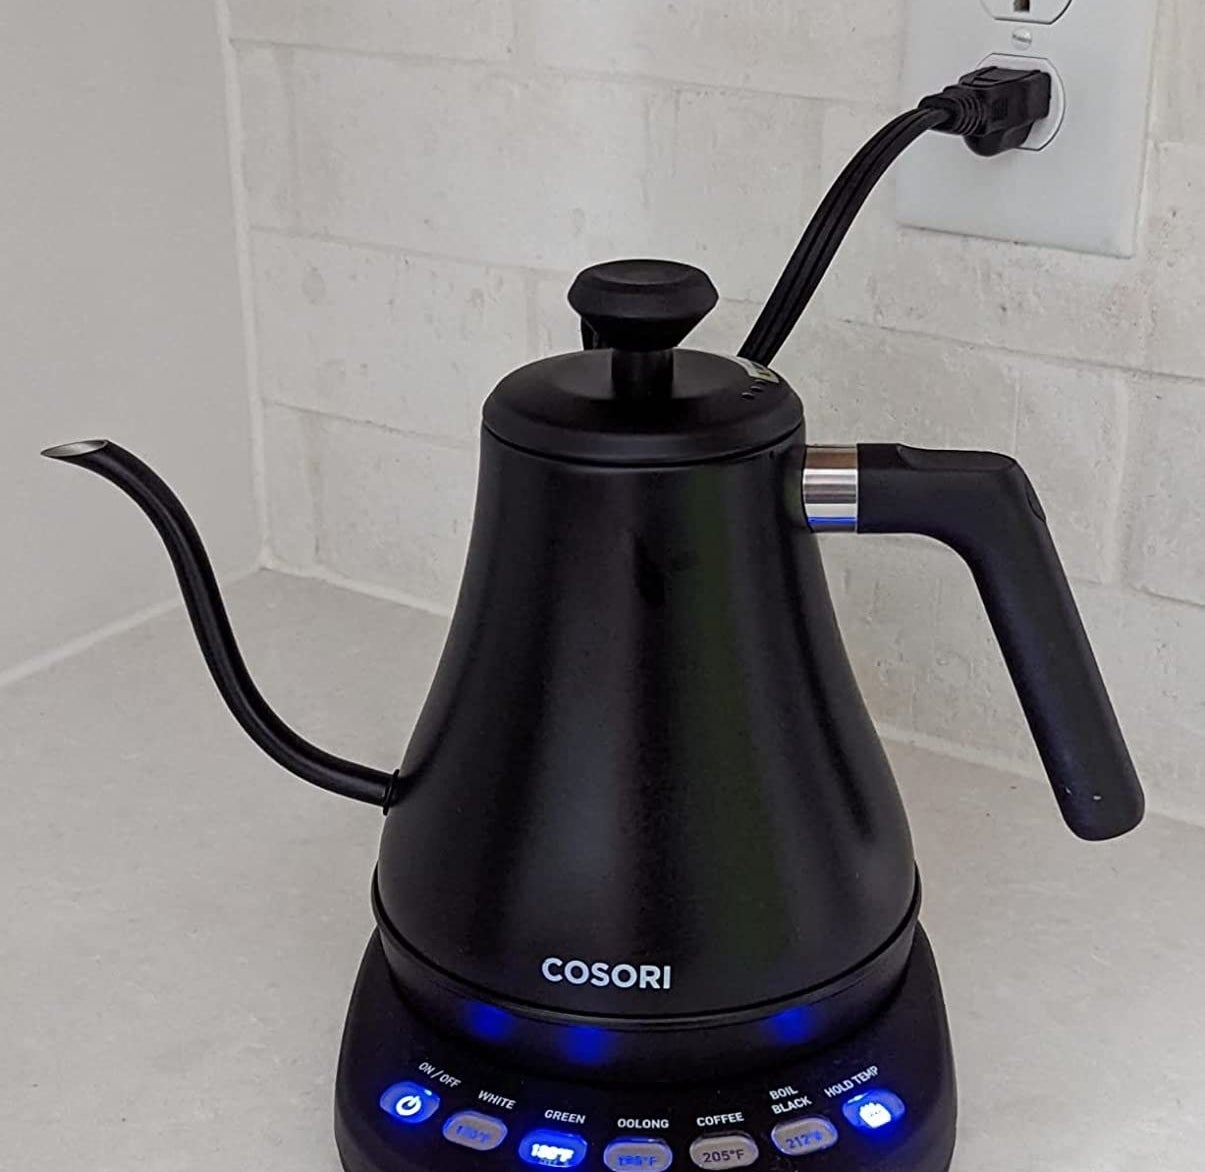 Reviewer image of black kettle on kitchen countertop